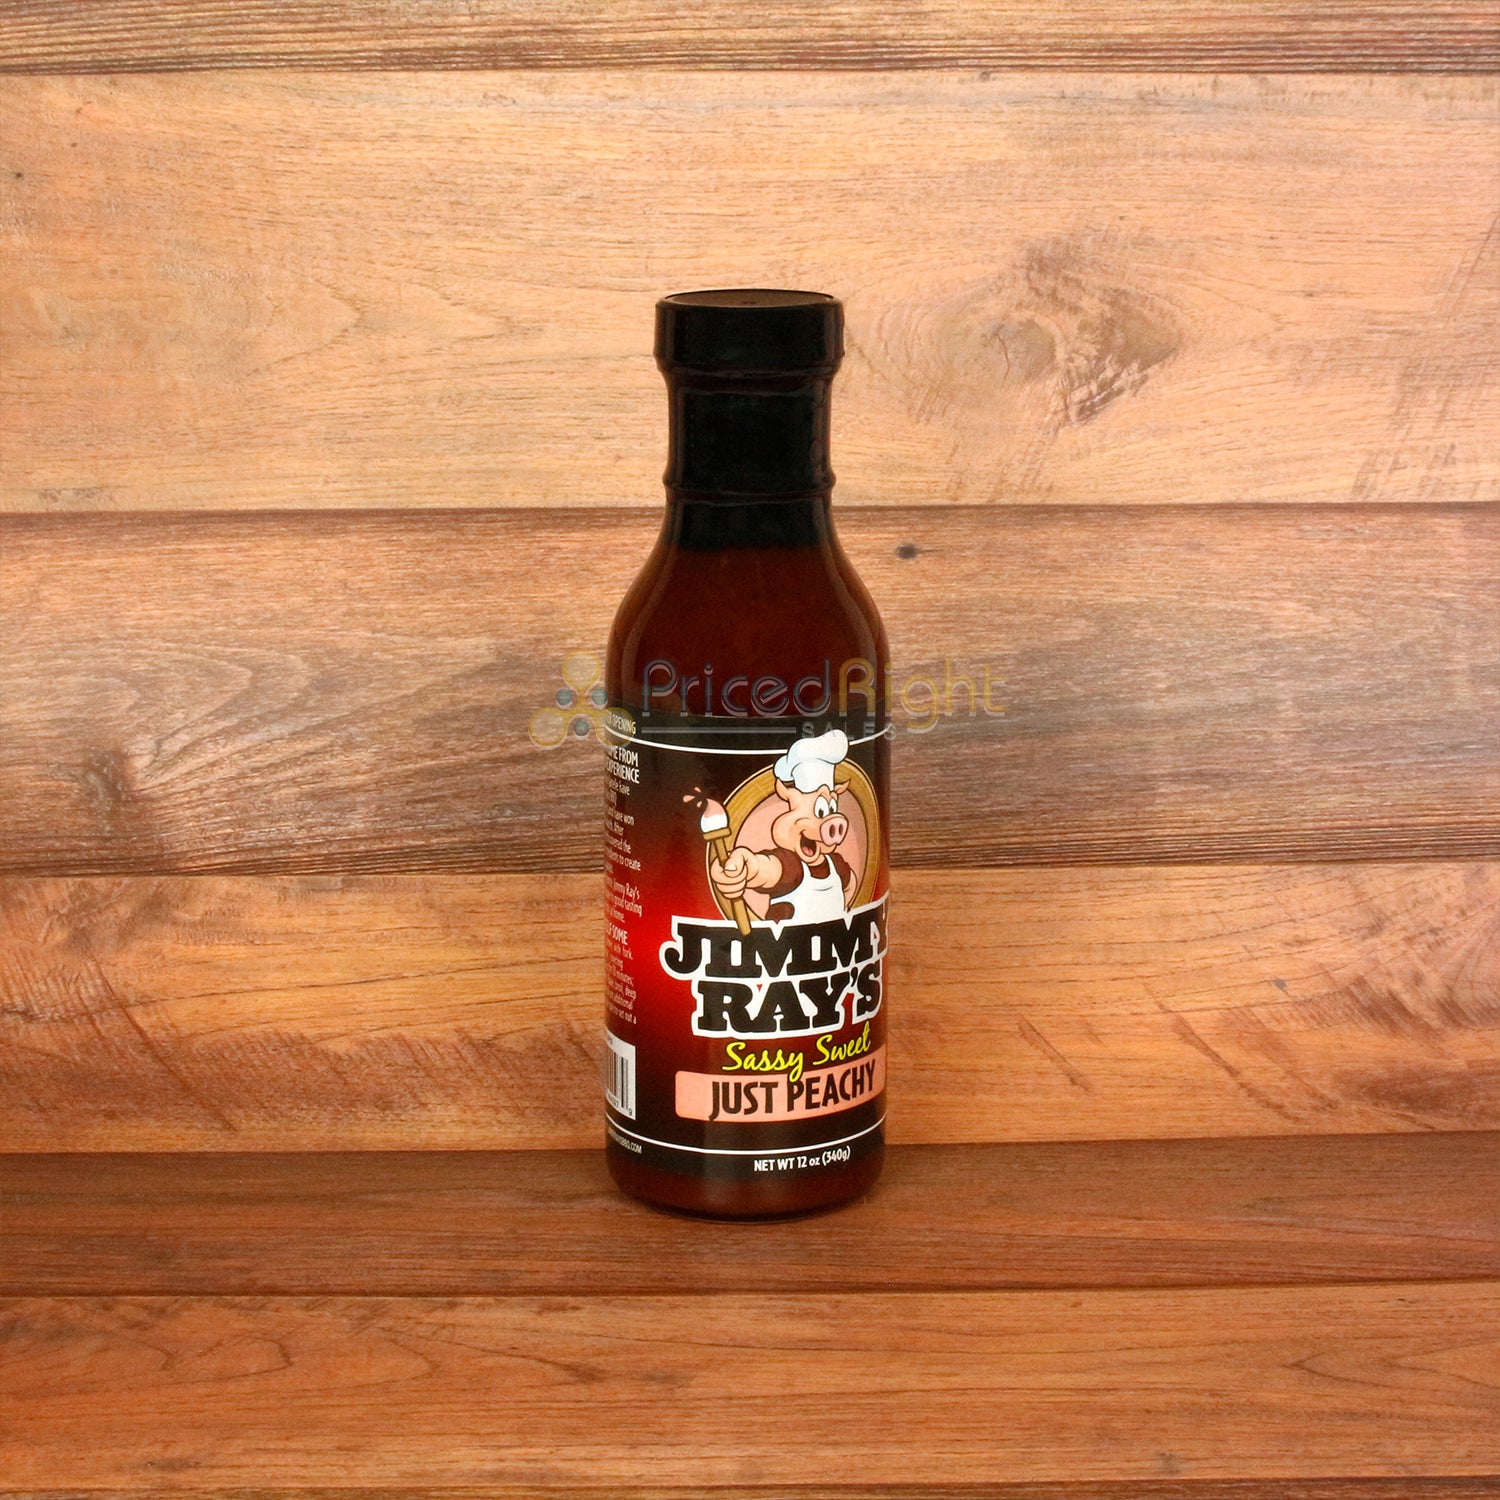 Jimmy Ray's Sassy Sweet Just Peachy BBQ Sauce Pork Gluten Free No MSG 12 Ounce